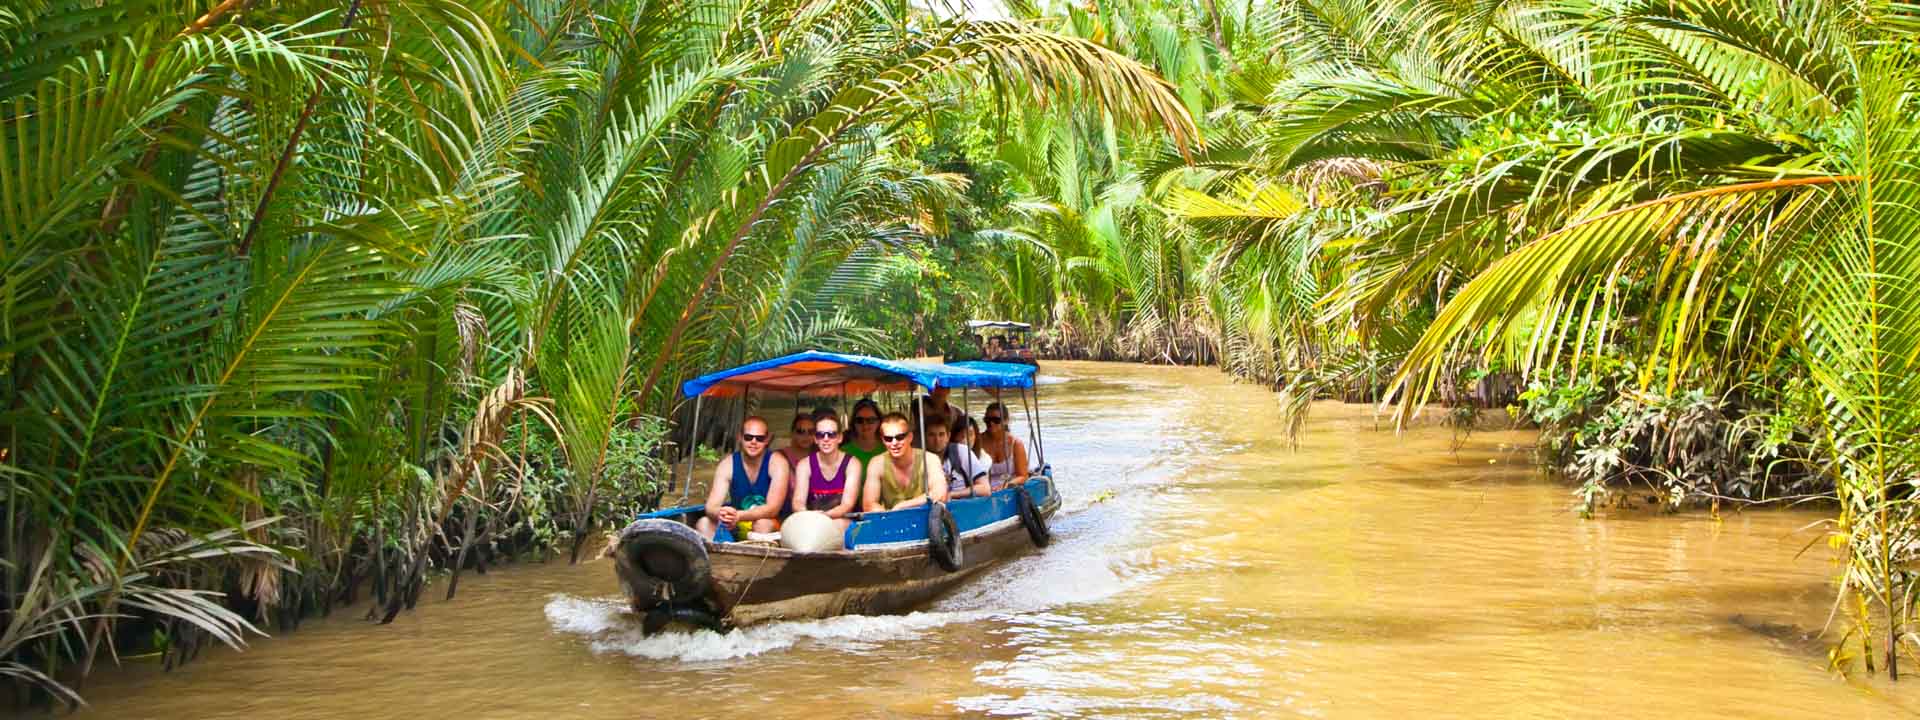 Exclusive Private Mekong Delta On Song Xanh Sampan 2 days